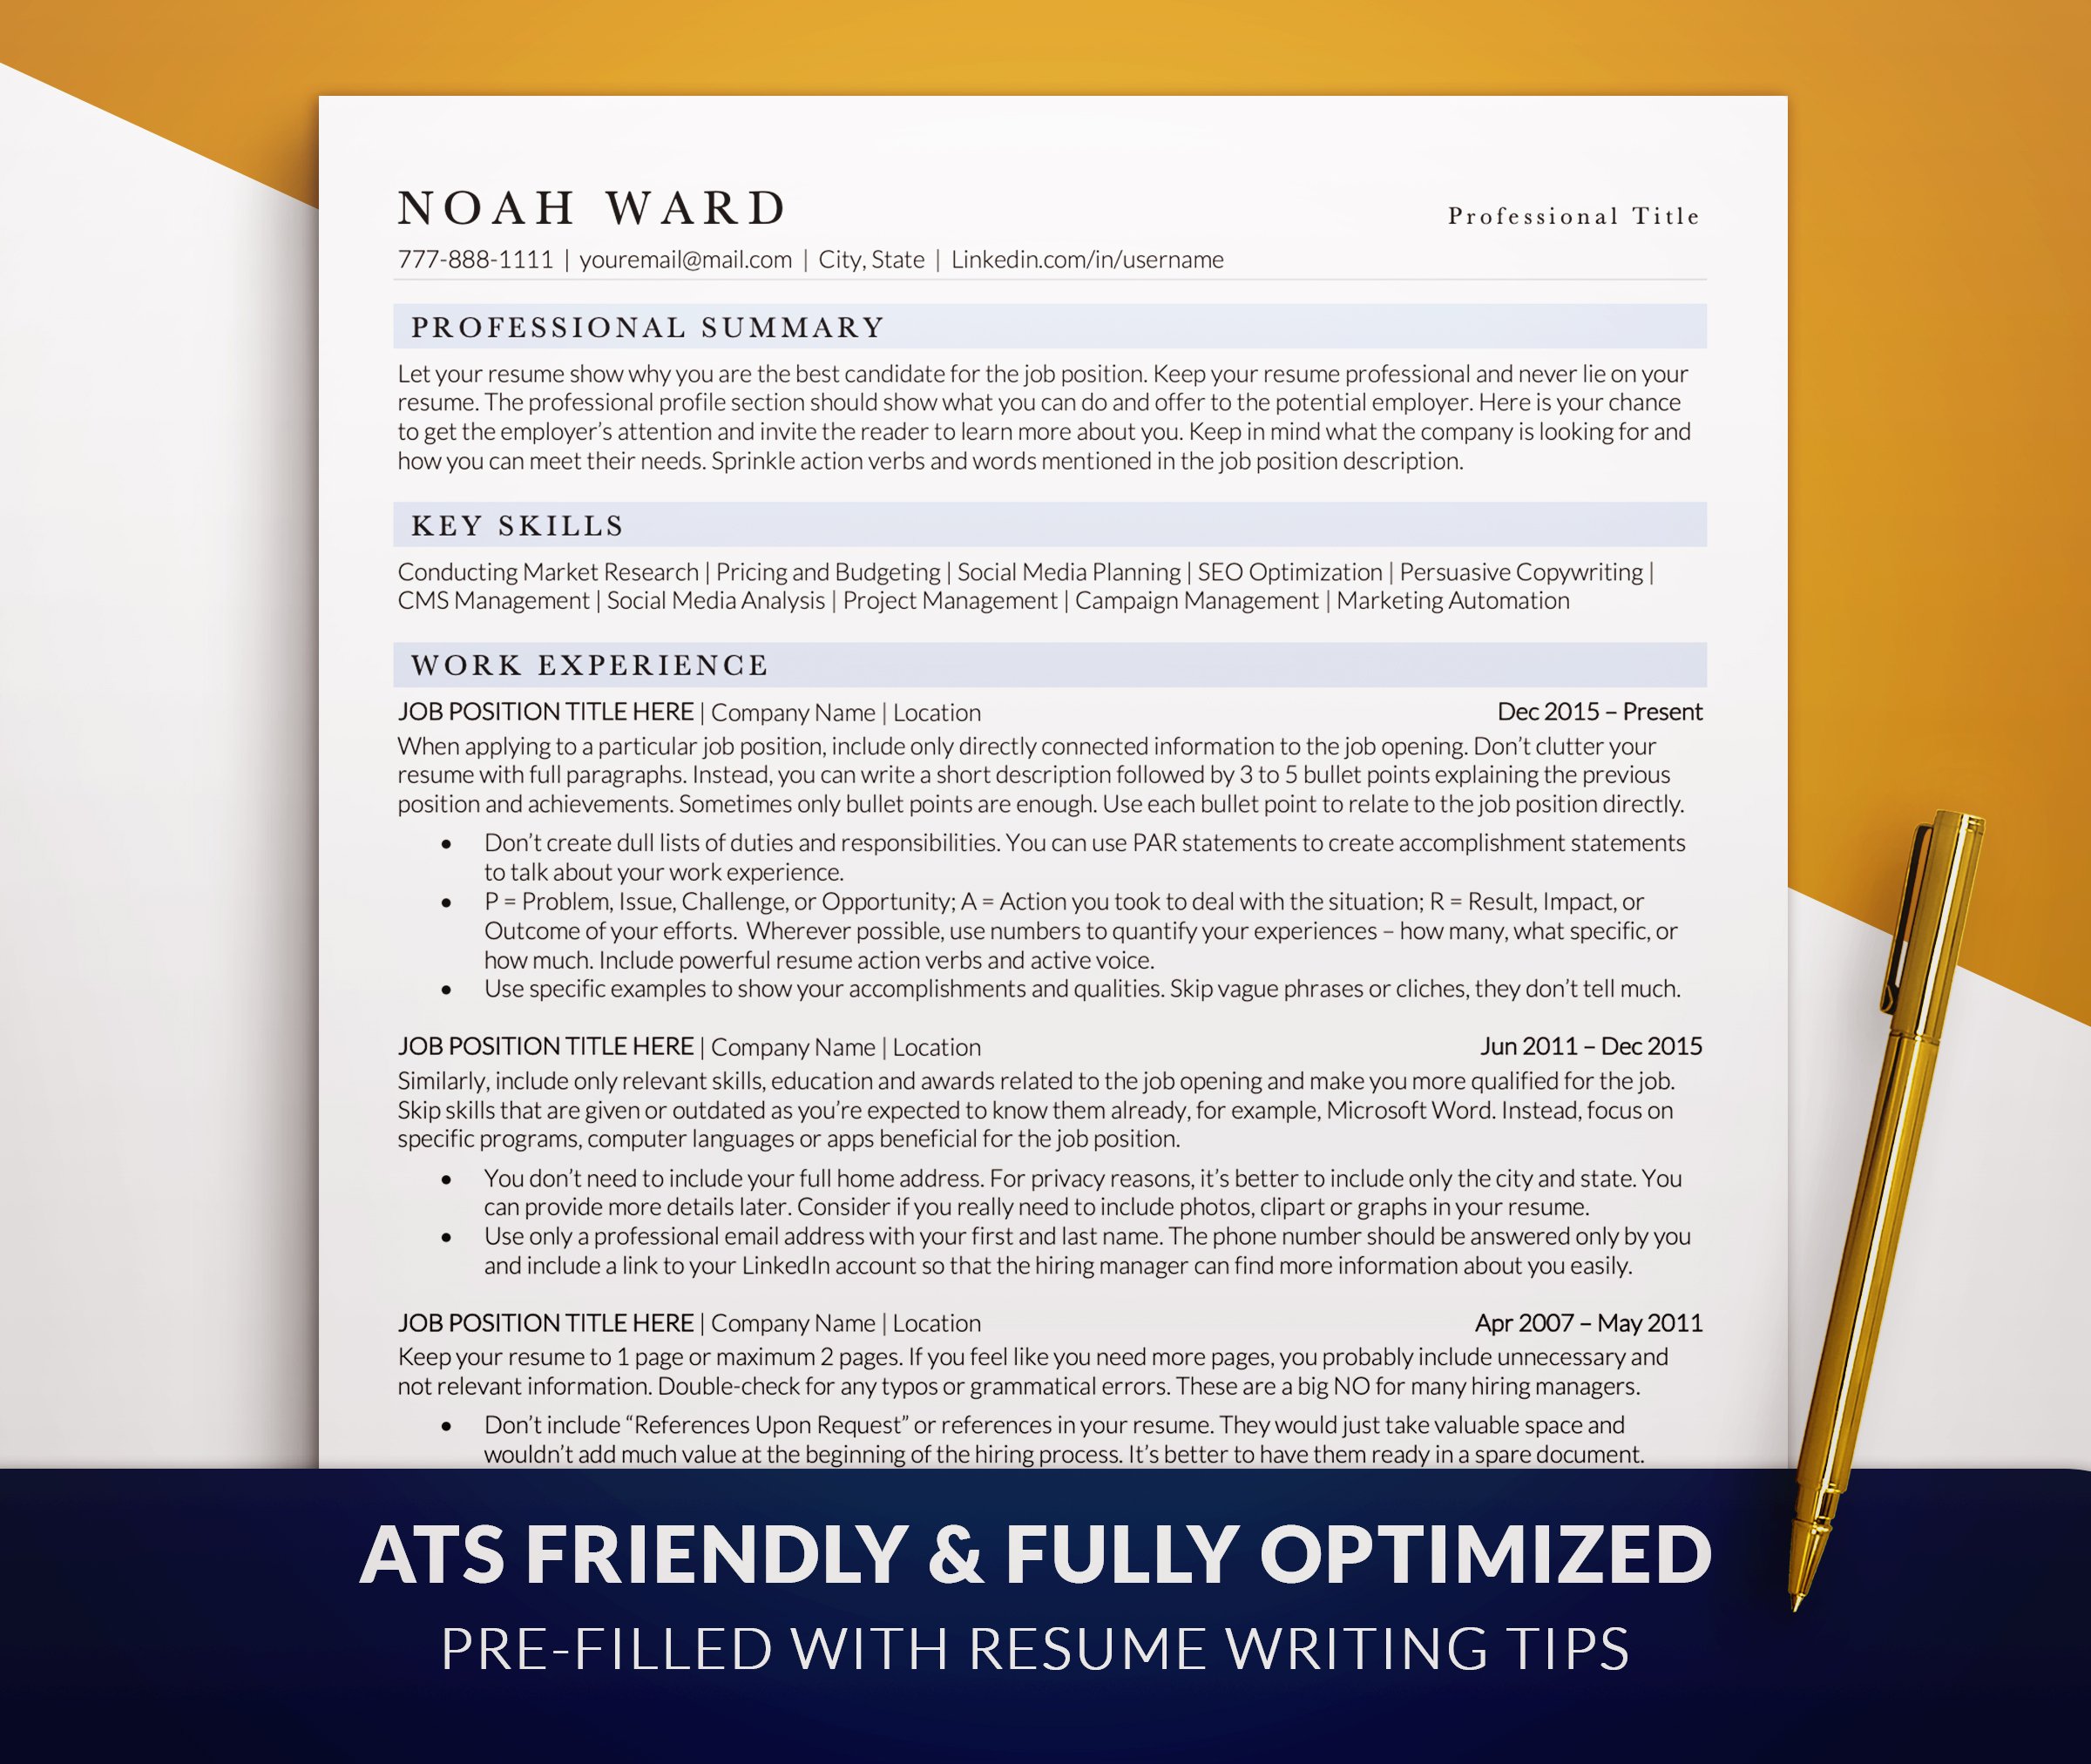 ATS Executive Resume Template Word cover image.